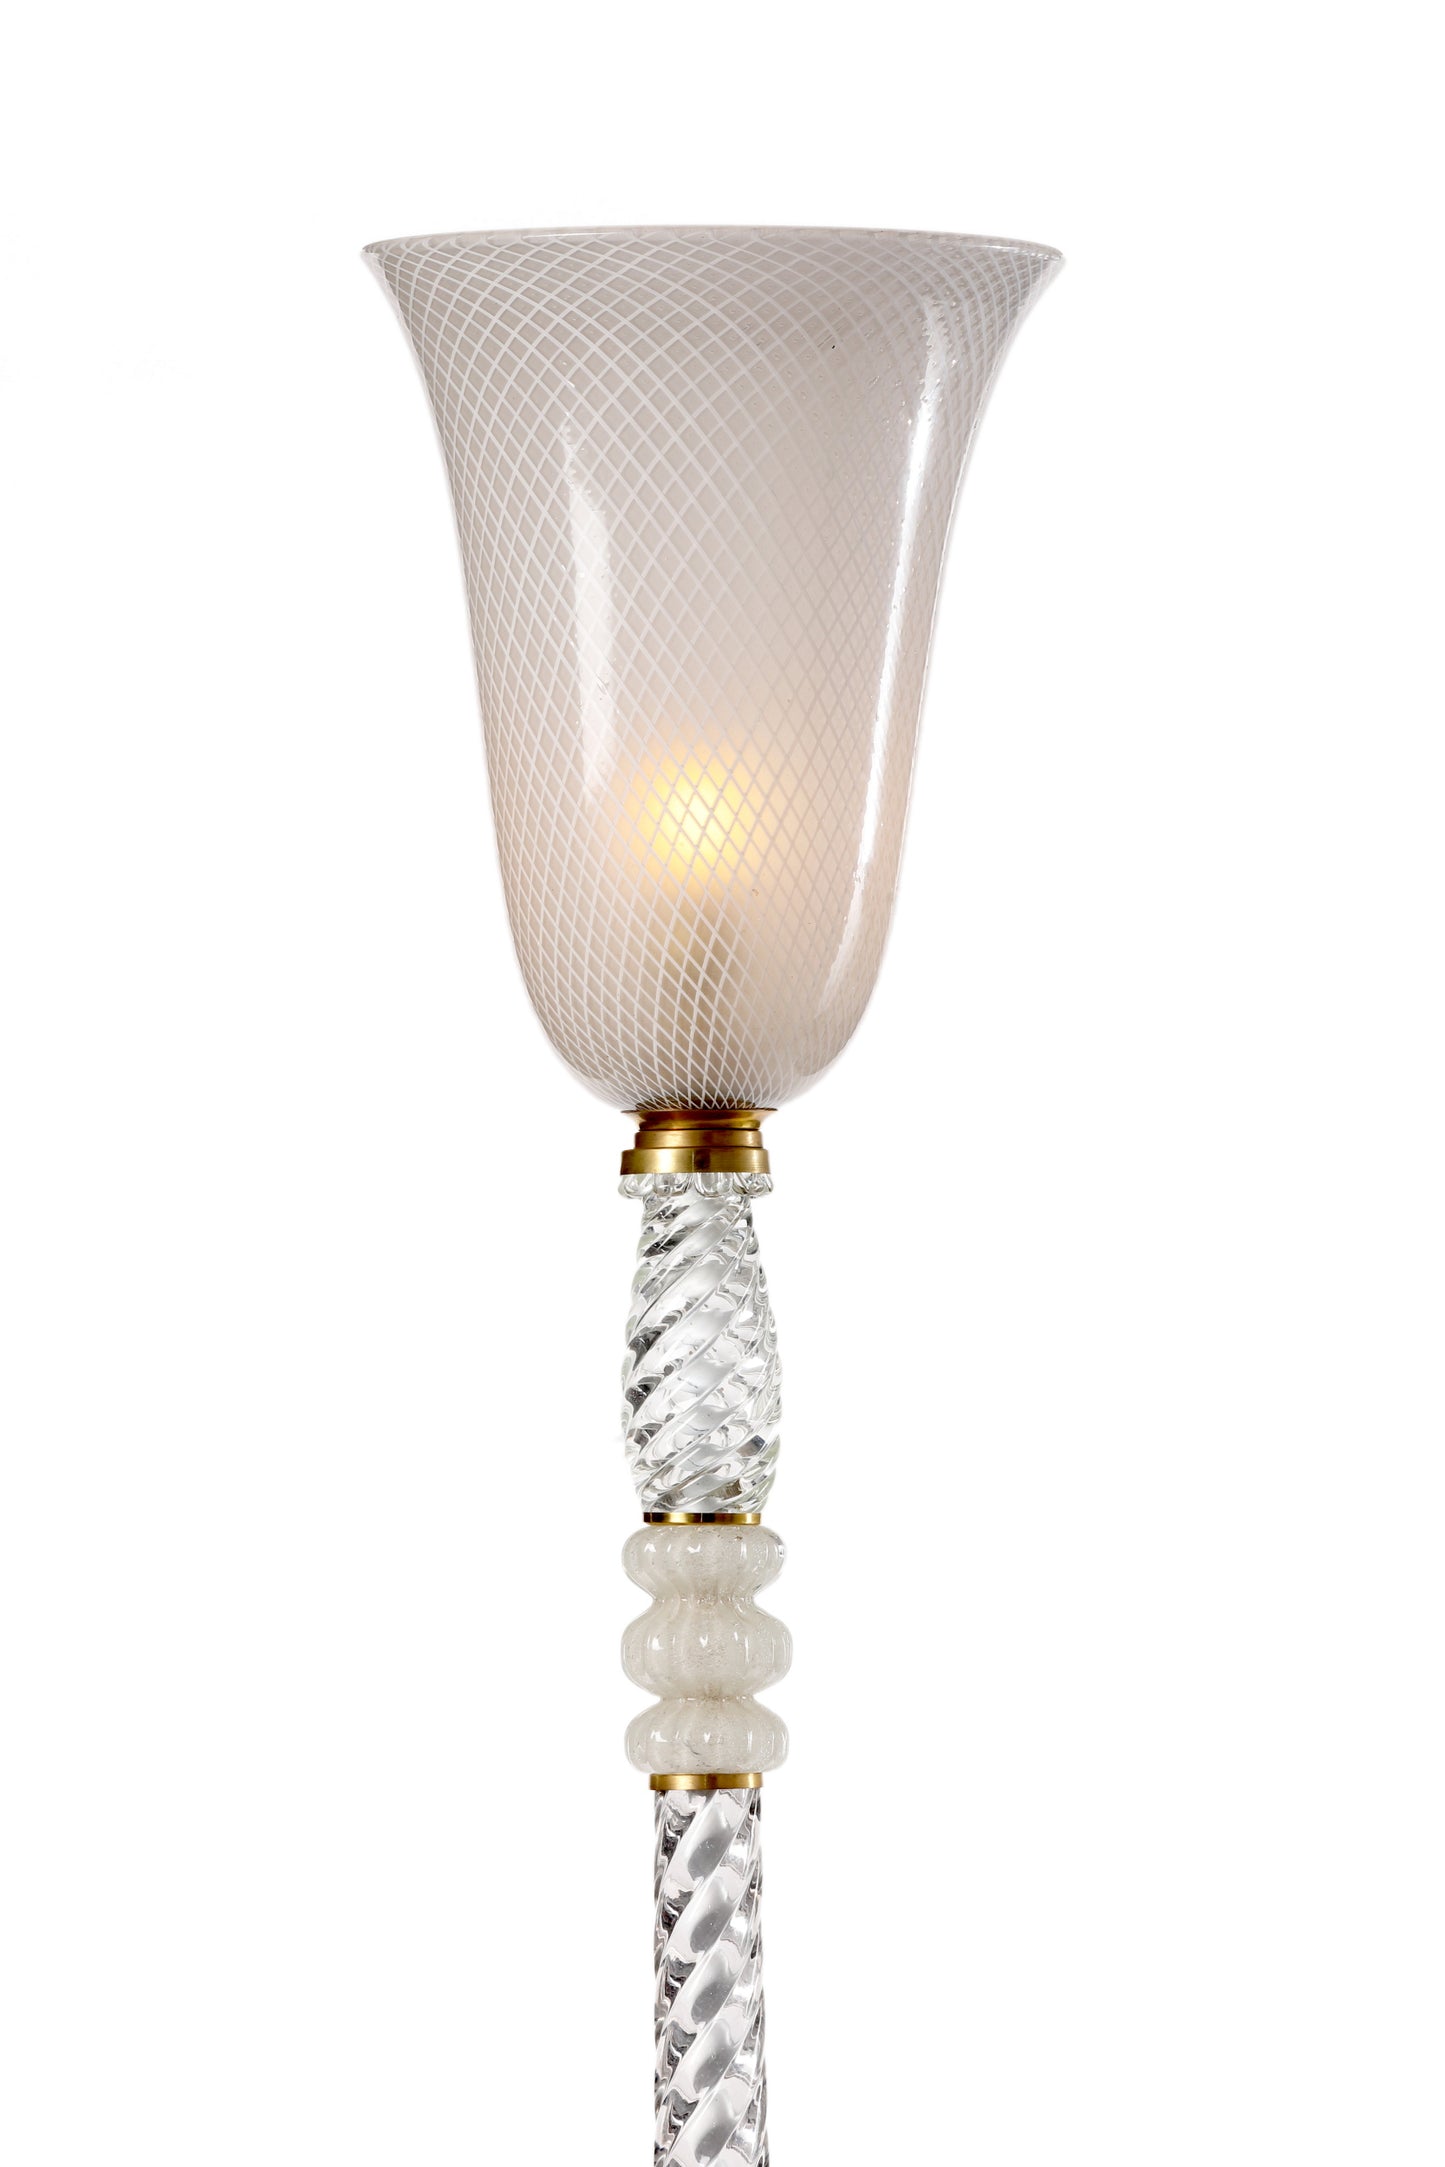 Murano glass floor lamp from the 30s